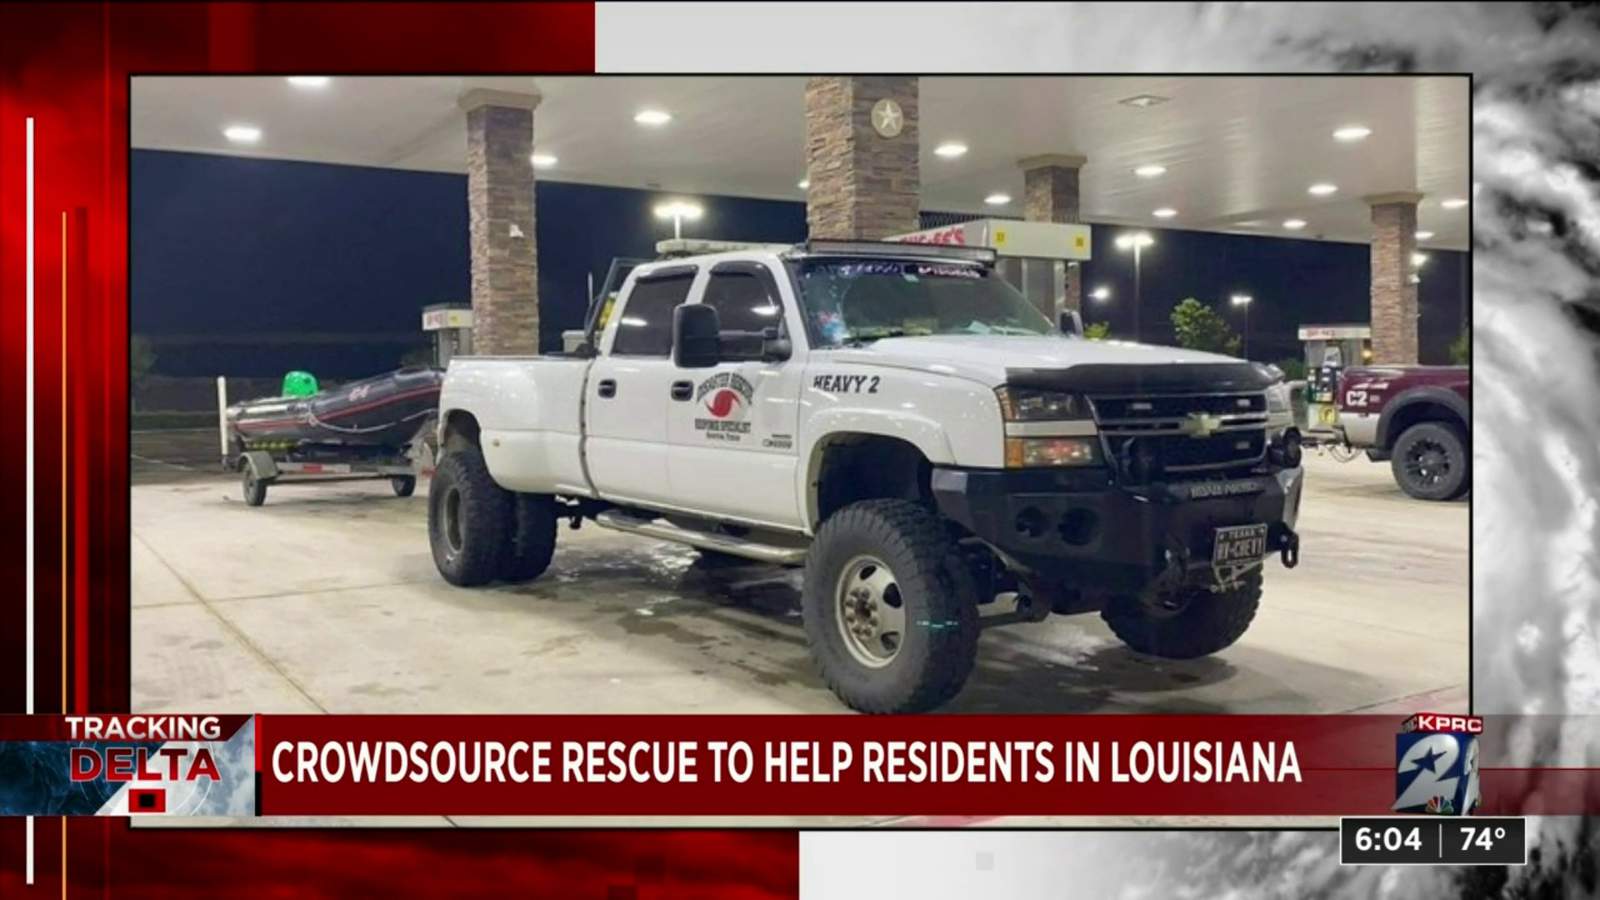 Non-profit Crowdsource Rescue to help residents in Louisiana